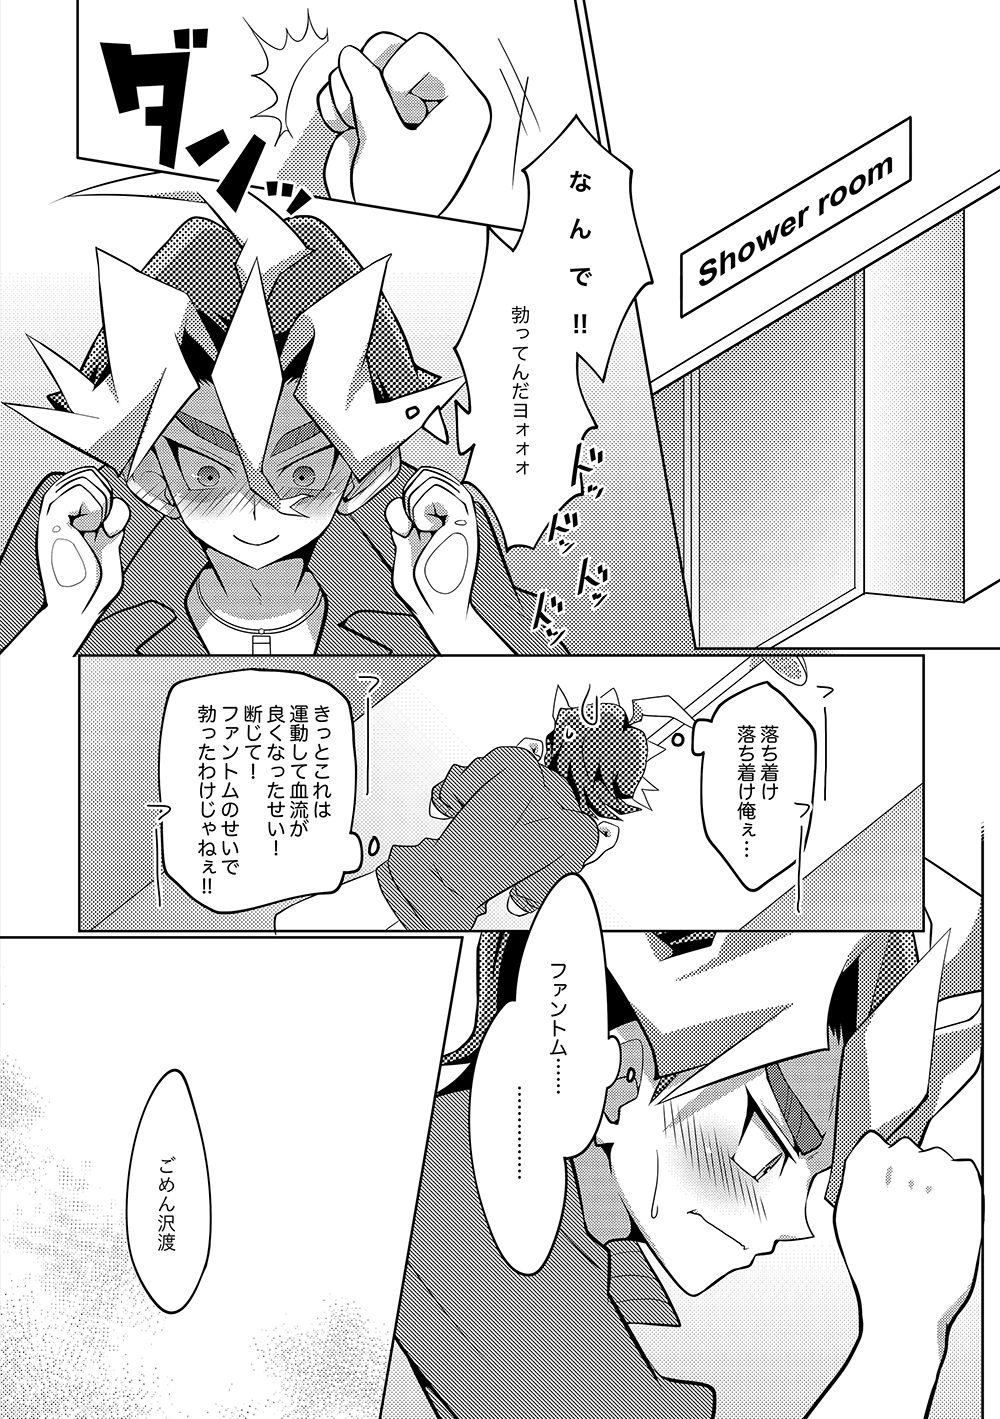 Mouth SxS H! ANOTHER - Yu-gi-oh arc-v Marido - Page 7